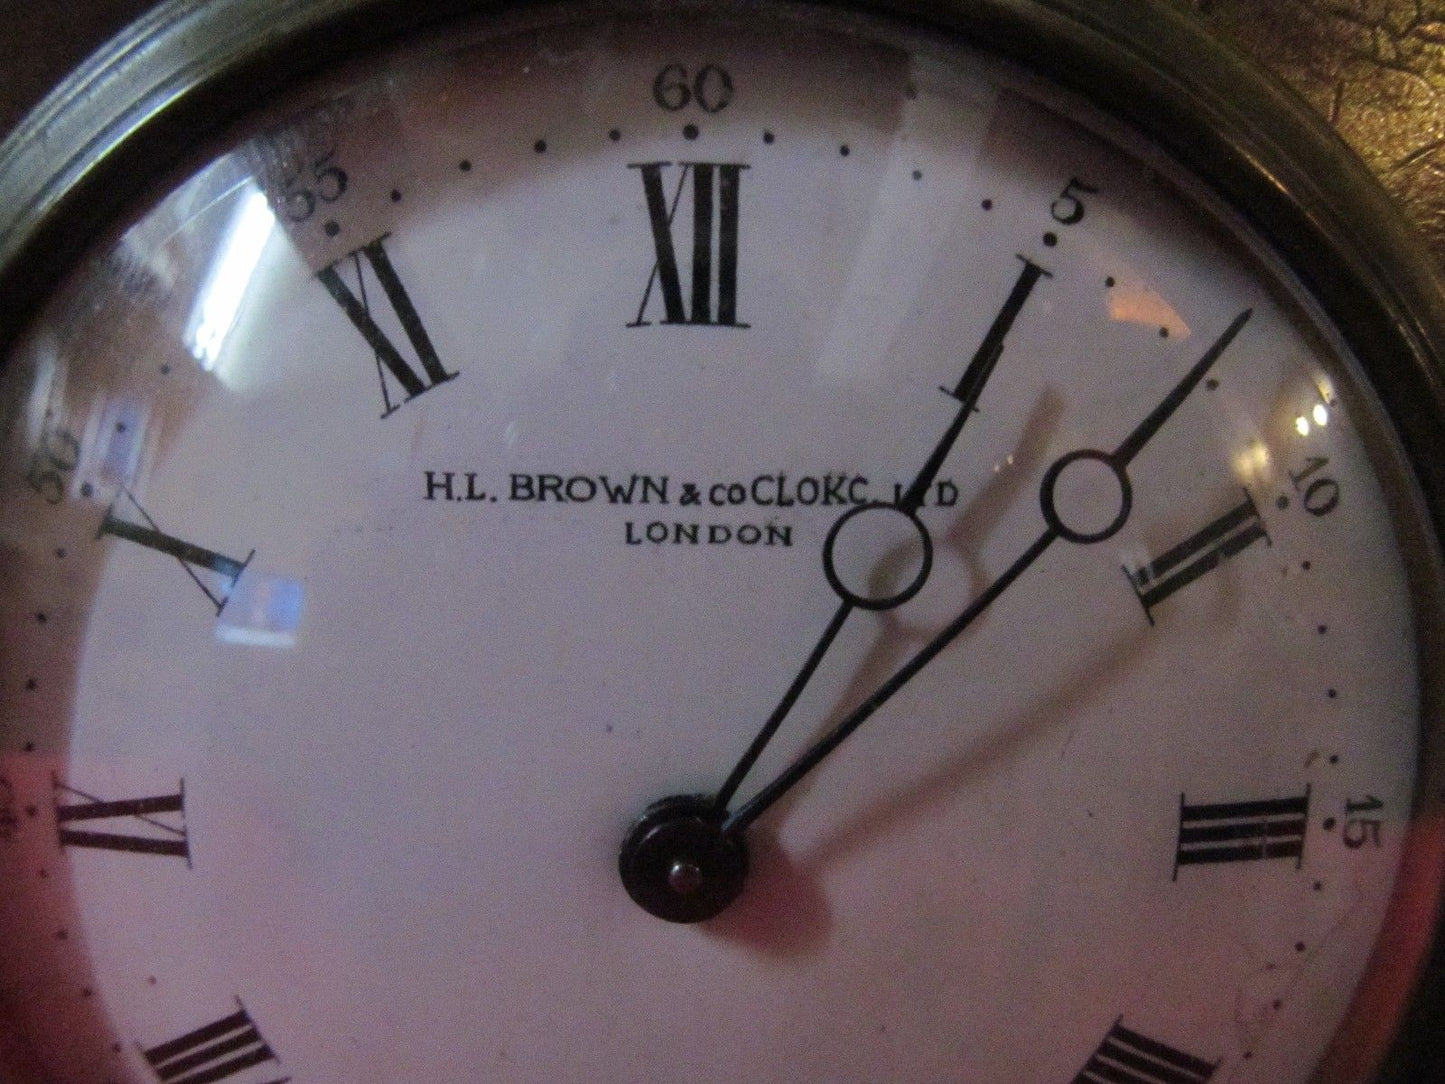 FINELY INLAID ANTIQUE EDWARDIAN MAHOGANY DESK CLOCK BY H. L. BROWN ENGLAND